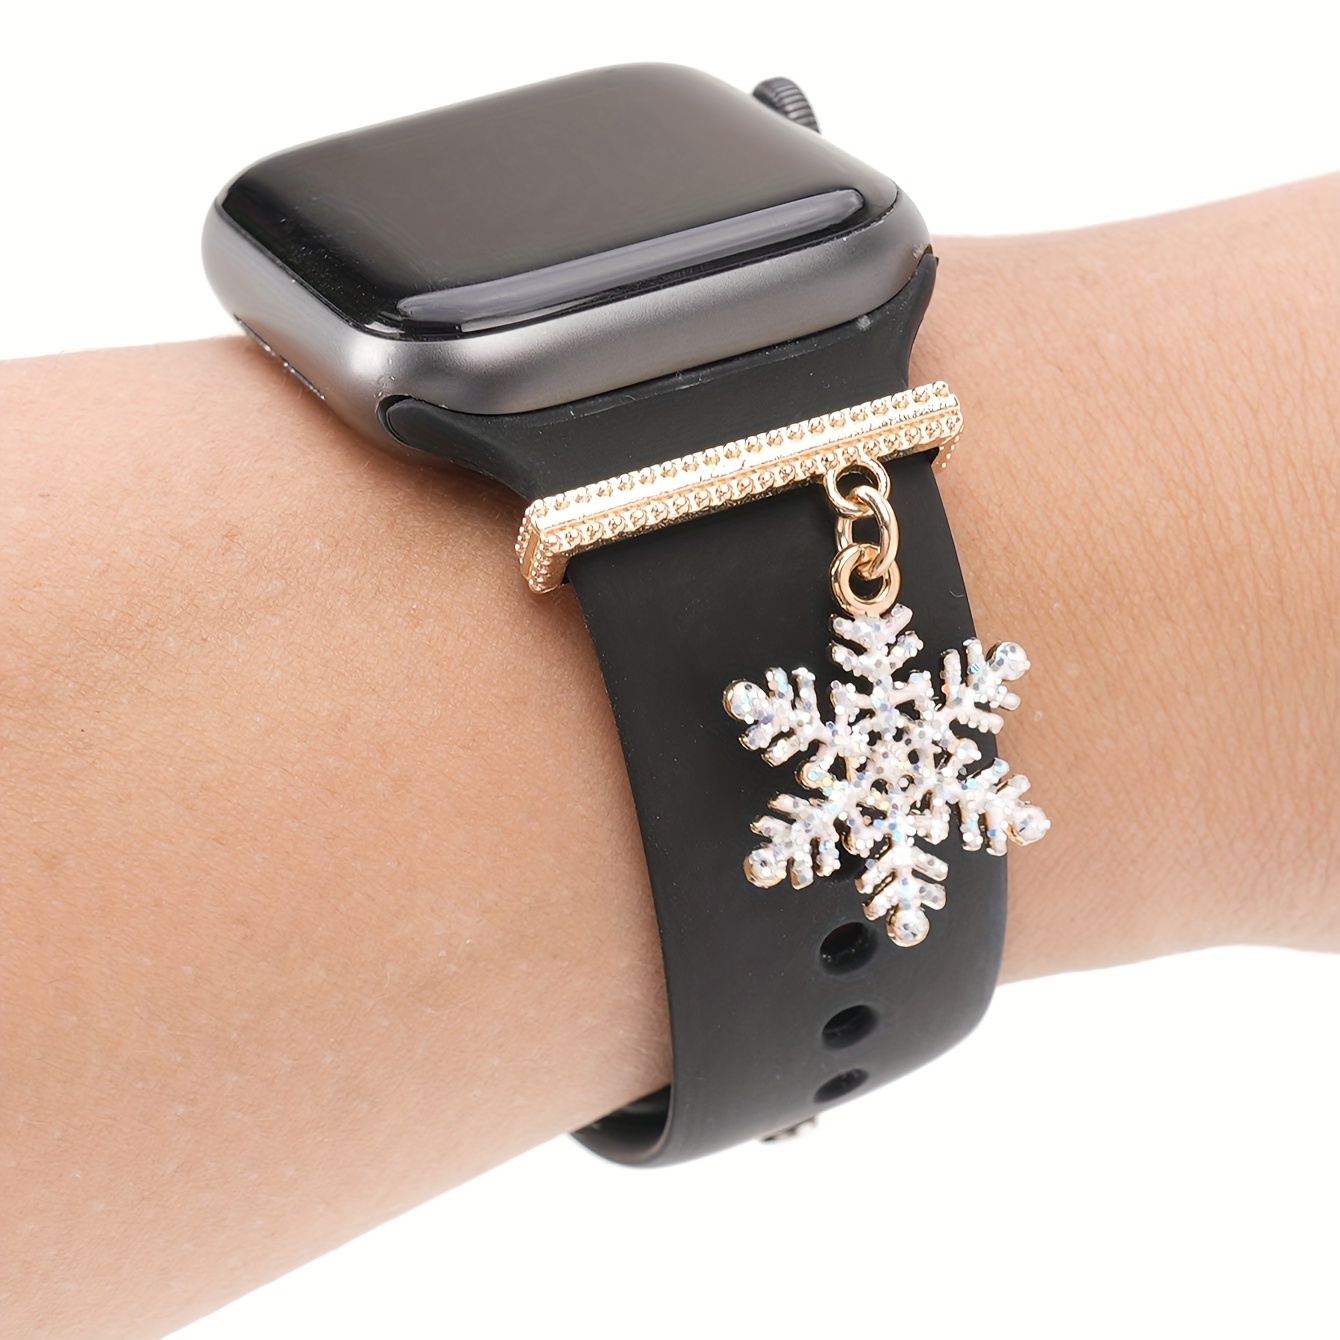 1pc Sparkling Rhinestones Planet Watch band Charm For Apple Watch